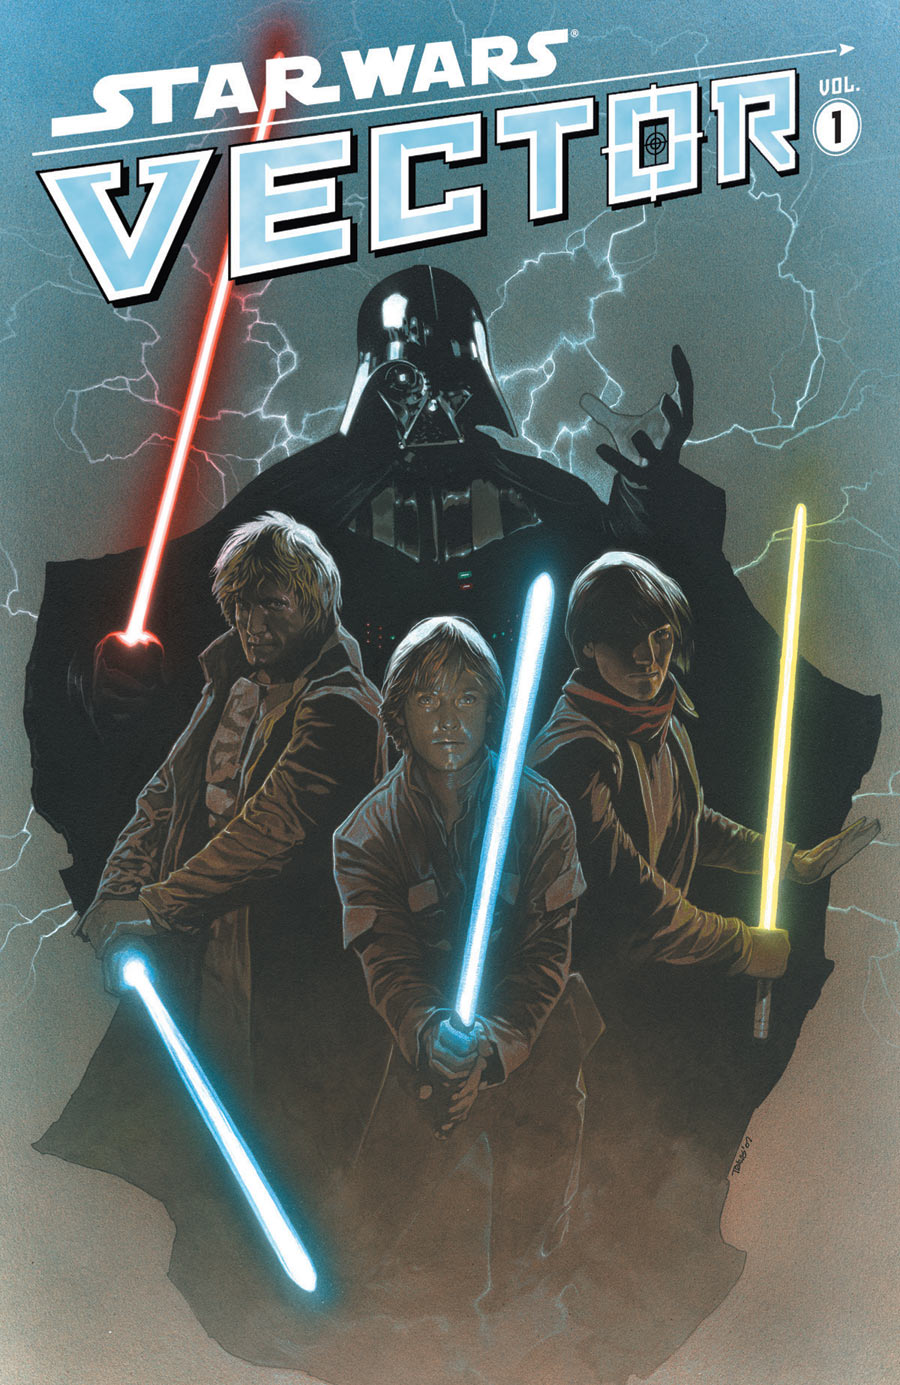 Star Wars Vector Graphic Novel Volume 1 Chapters 1 & 2